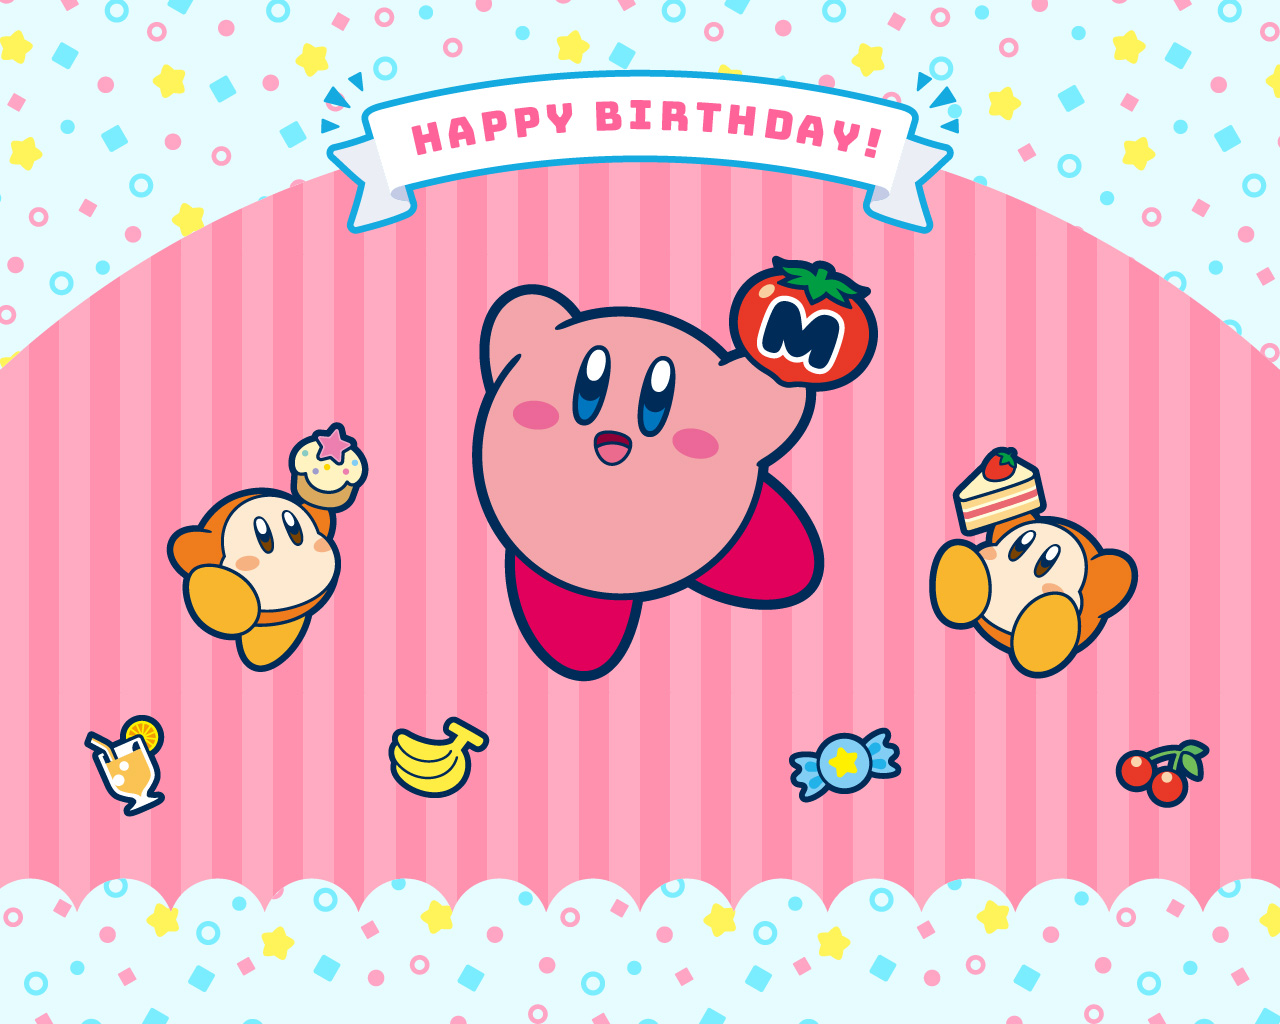 Happy Birthday Kirby Wallpaper Up For Download